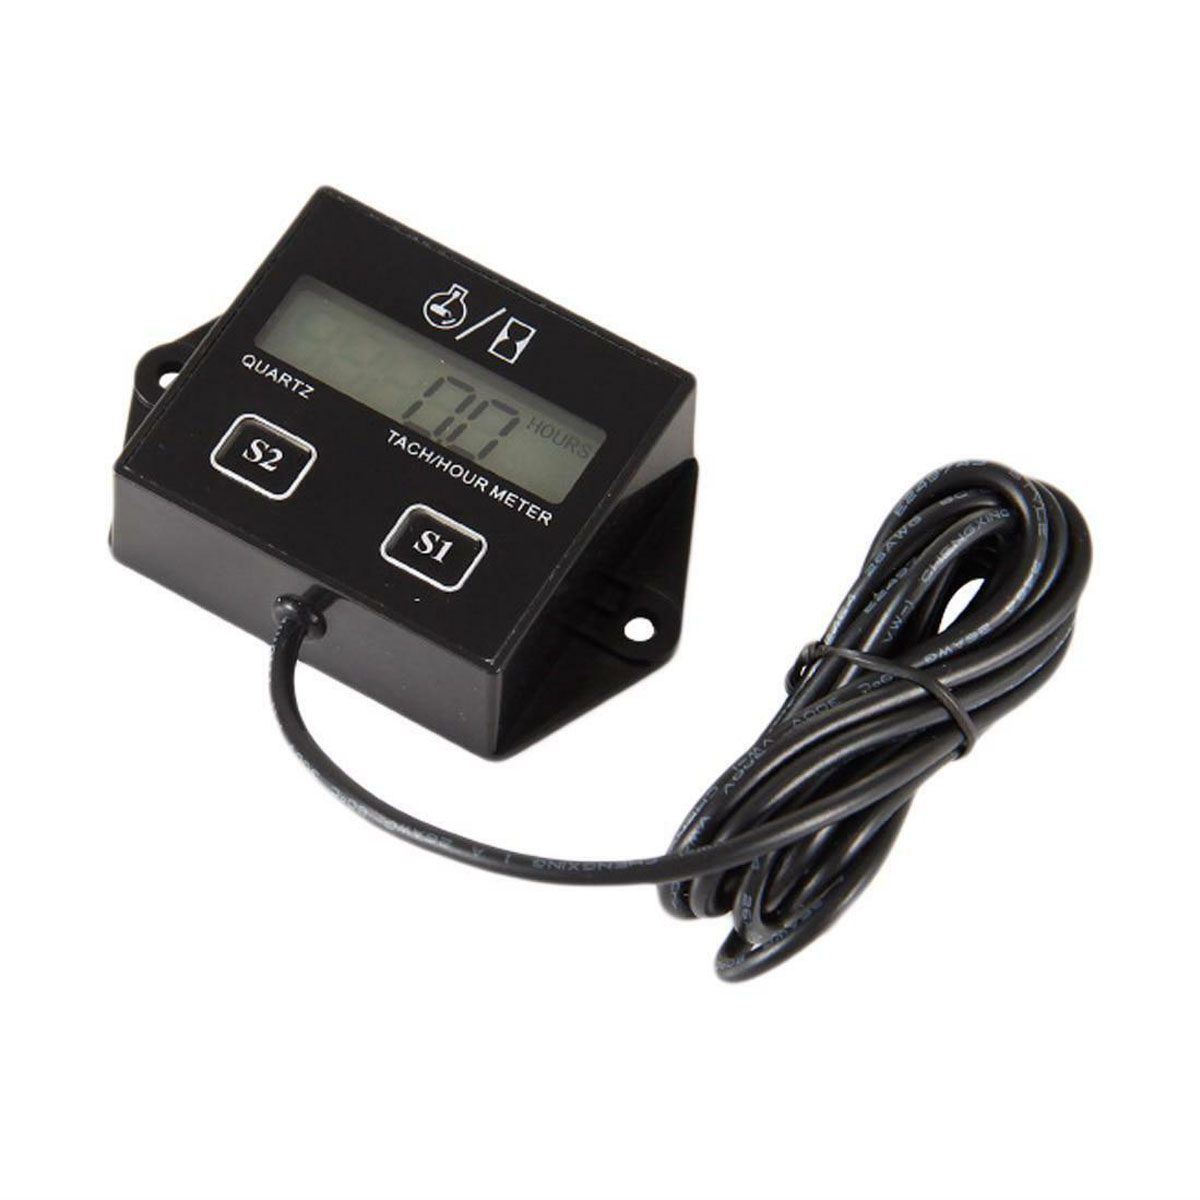 Motorcycle-Car-Gauge-Chainsaw-Tachometer-Engine-Hour-Meter-Digital-Electronic-1677669